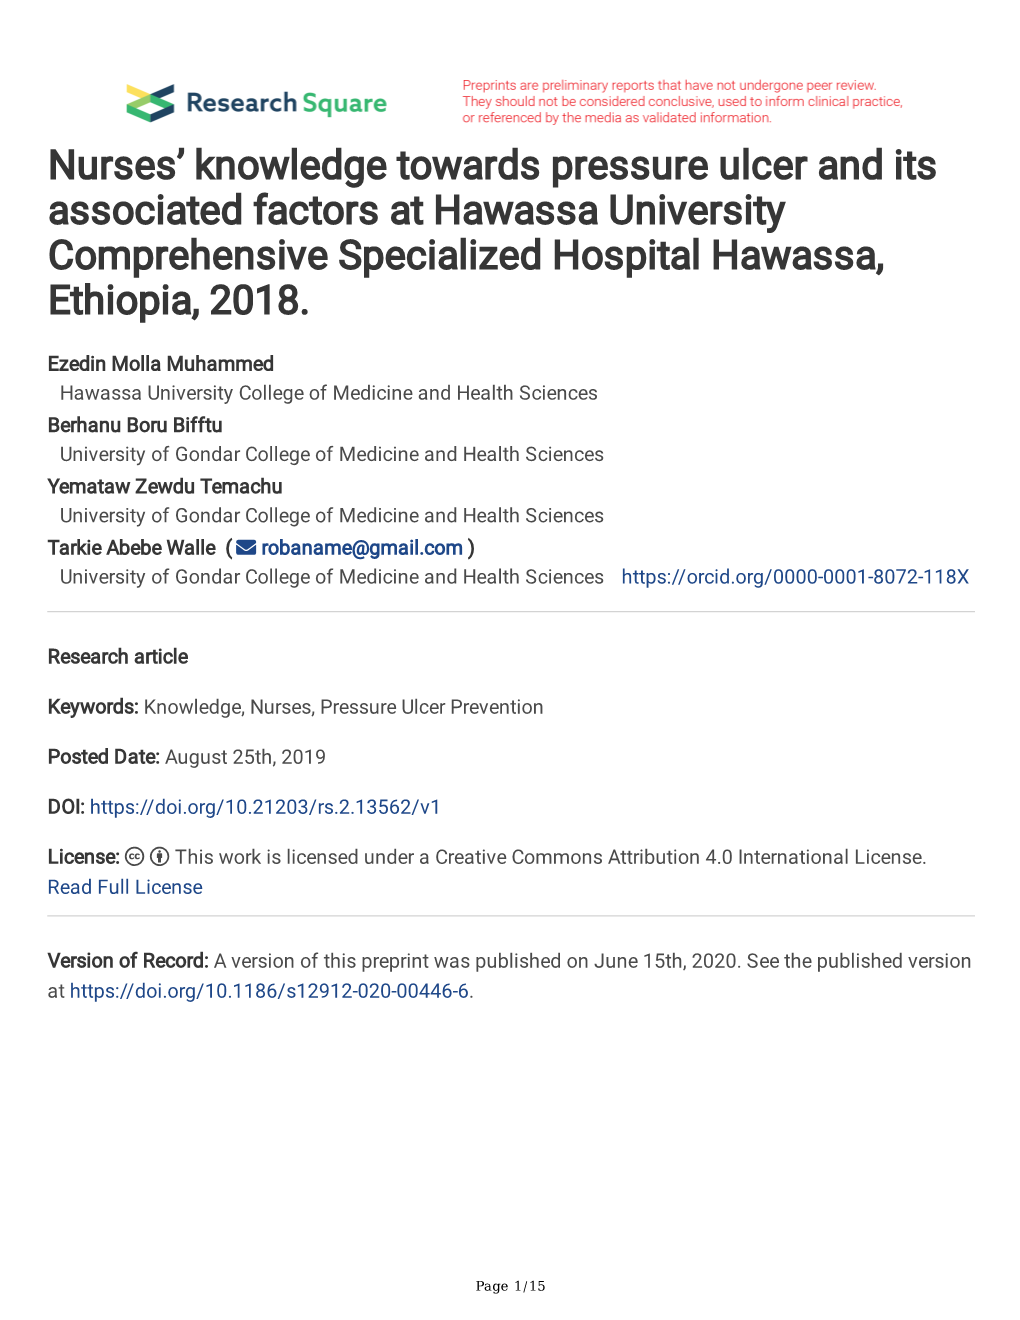 Nurses' Knowledge Towards Pressure Ulcer and Its Associated Factors At